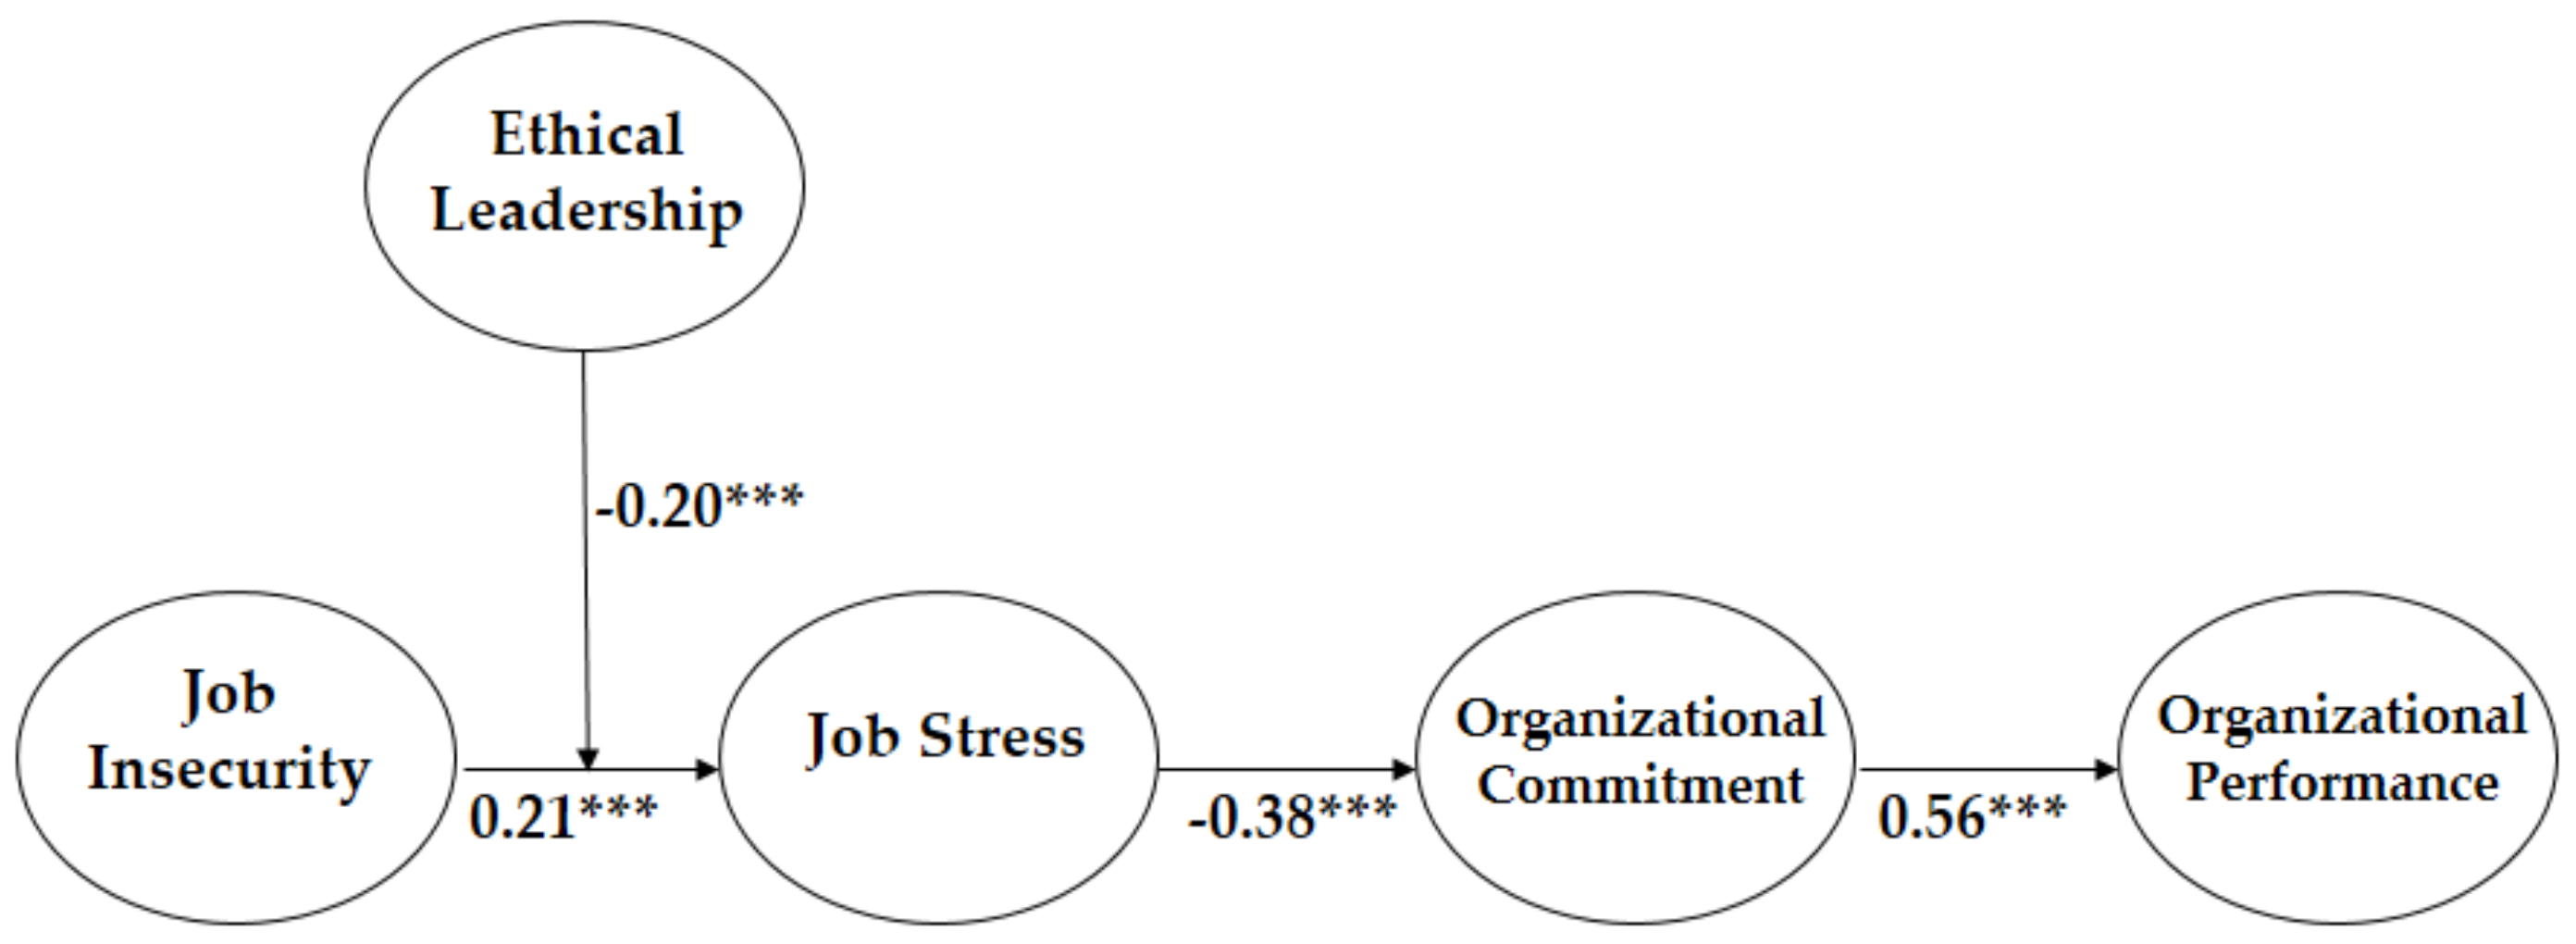 IJERPH | Free Full-Text | The Performance Implications of Job Insecurity:  The Sequential Mediating Effect of Job Stress and Organizational  Commitment, and the Buffering Role of Ethical Leadership | HTML